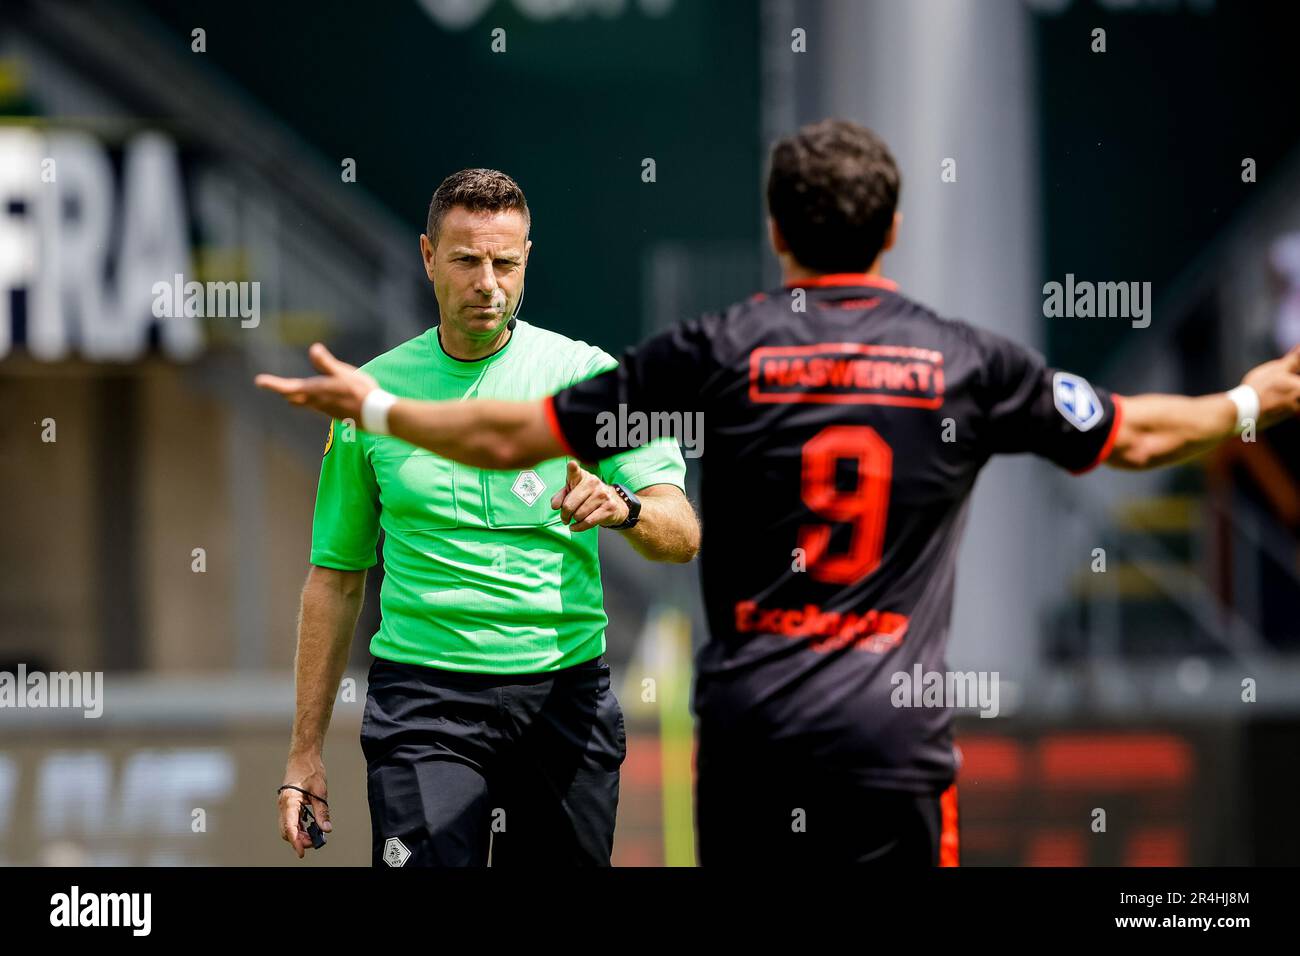 Sittard, Netherlands. 28th May, 2023. SITTARD, NETHERLANDS - MAY 28: Referee Pol van Boekel gestures while Pedro Marques of N.E.C. Nijmegen reacts during the Eredivisie match between Fortuna Sittard and N.E.C. Nijmegen at the Fortuna Sittard Stadion on May 28, 2023 in Sittard, Netherlands (Photo by Broer van den Boom/Orange Pictures) Credit: Orange Pics BV/Alamy Live News Stock Photo